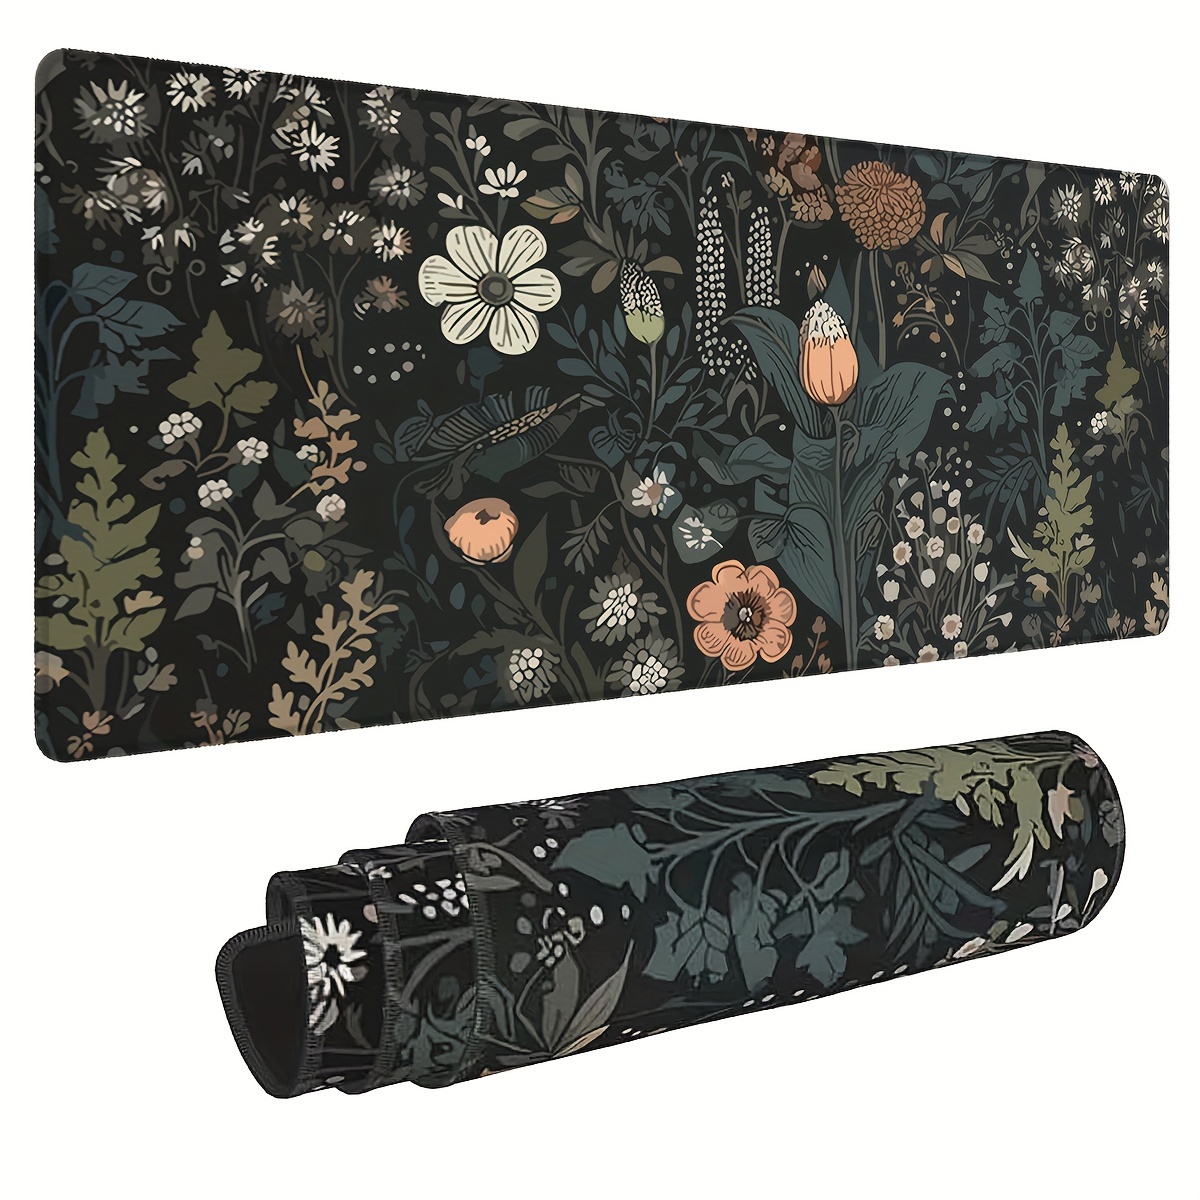 

Boho Flowers Large Gaming Mouse Pads Black Office Desk Mat With Non-slip Rubber Base,stitched Edge Mousepad For Work, Game, Home Christmas Thanksgiving Gift